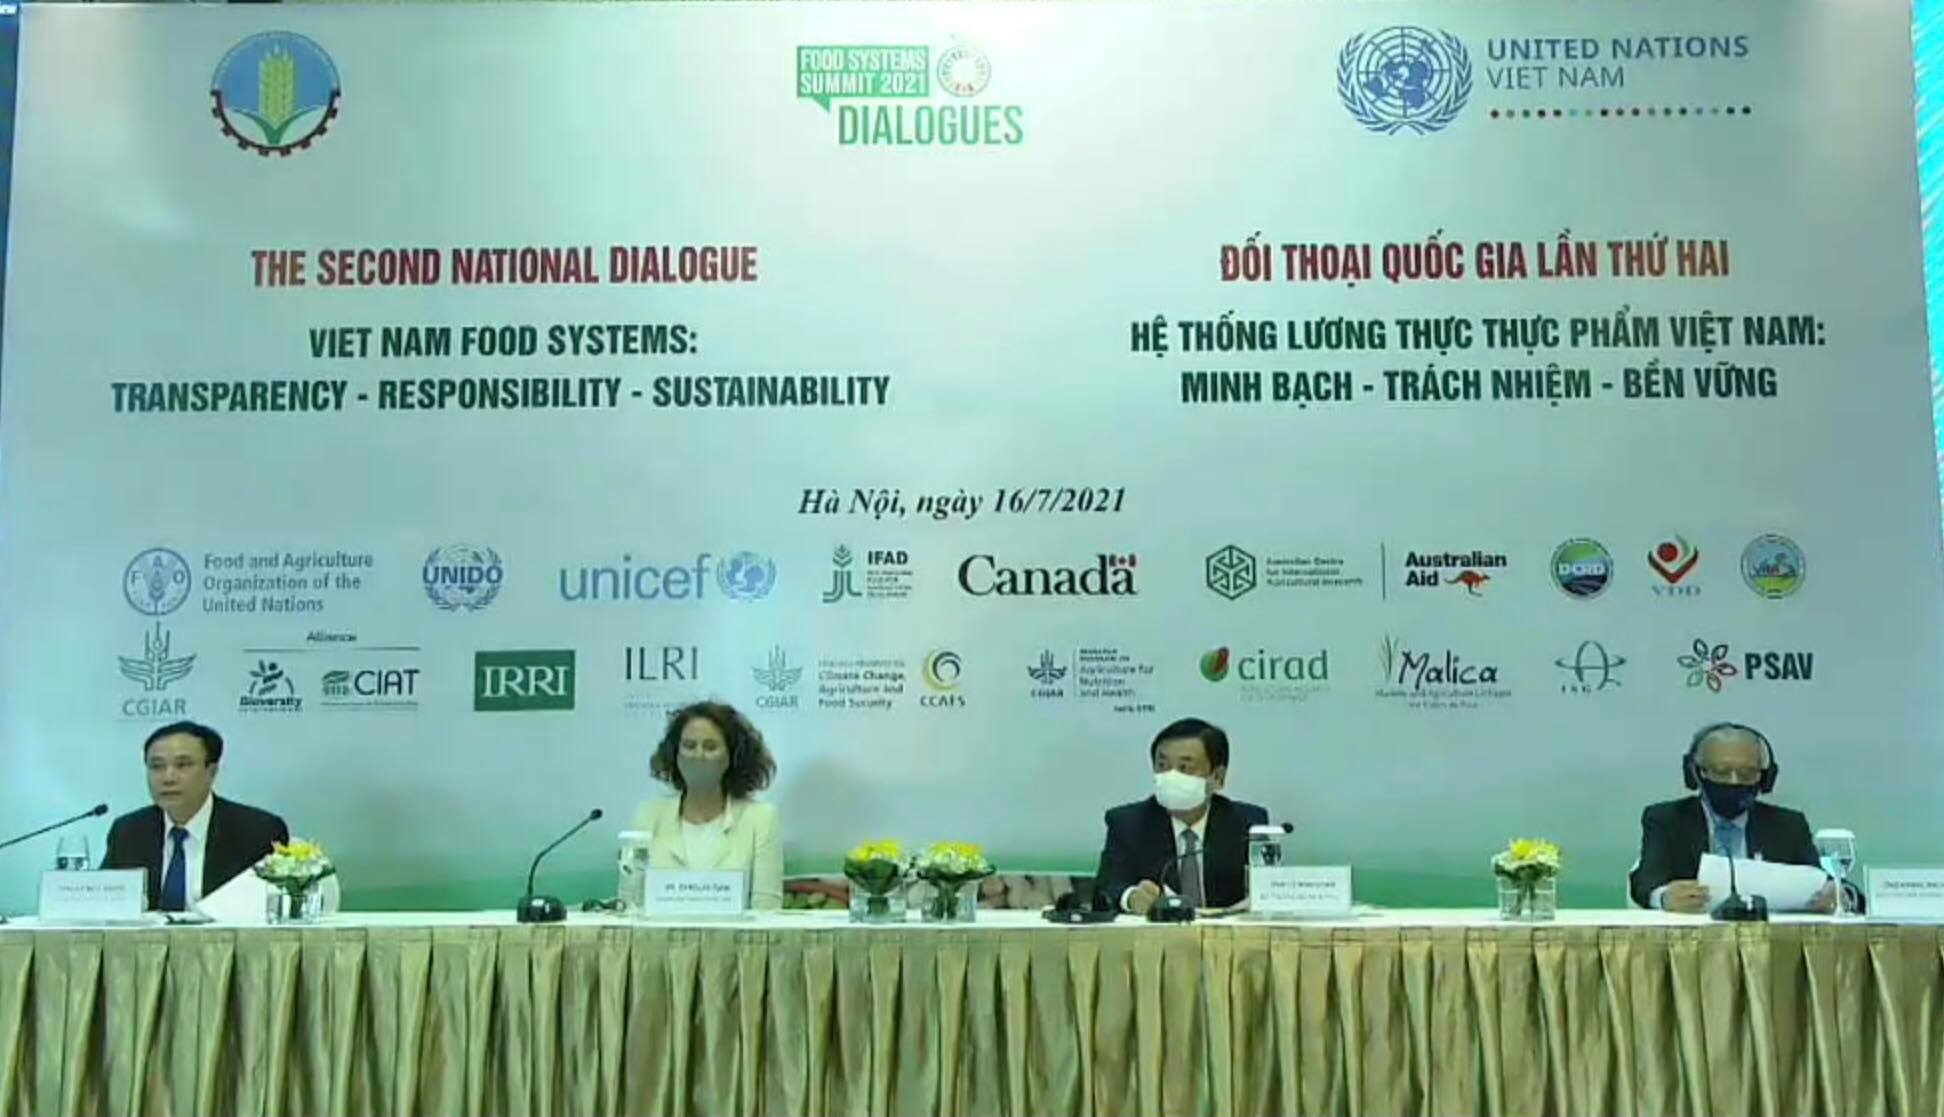 Vietnam, UN, WB organize dialogue to discuss sustainable food systems amid poverty, climate change challenges